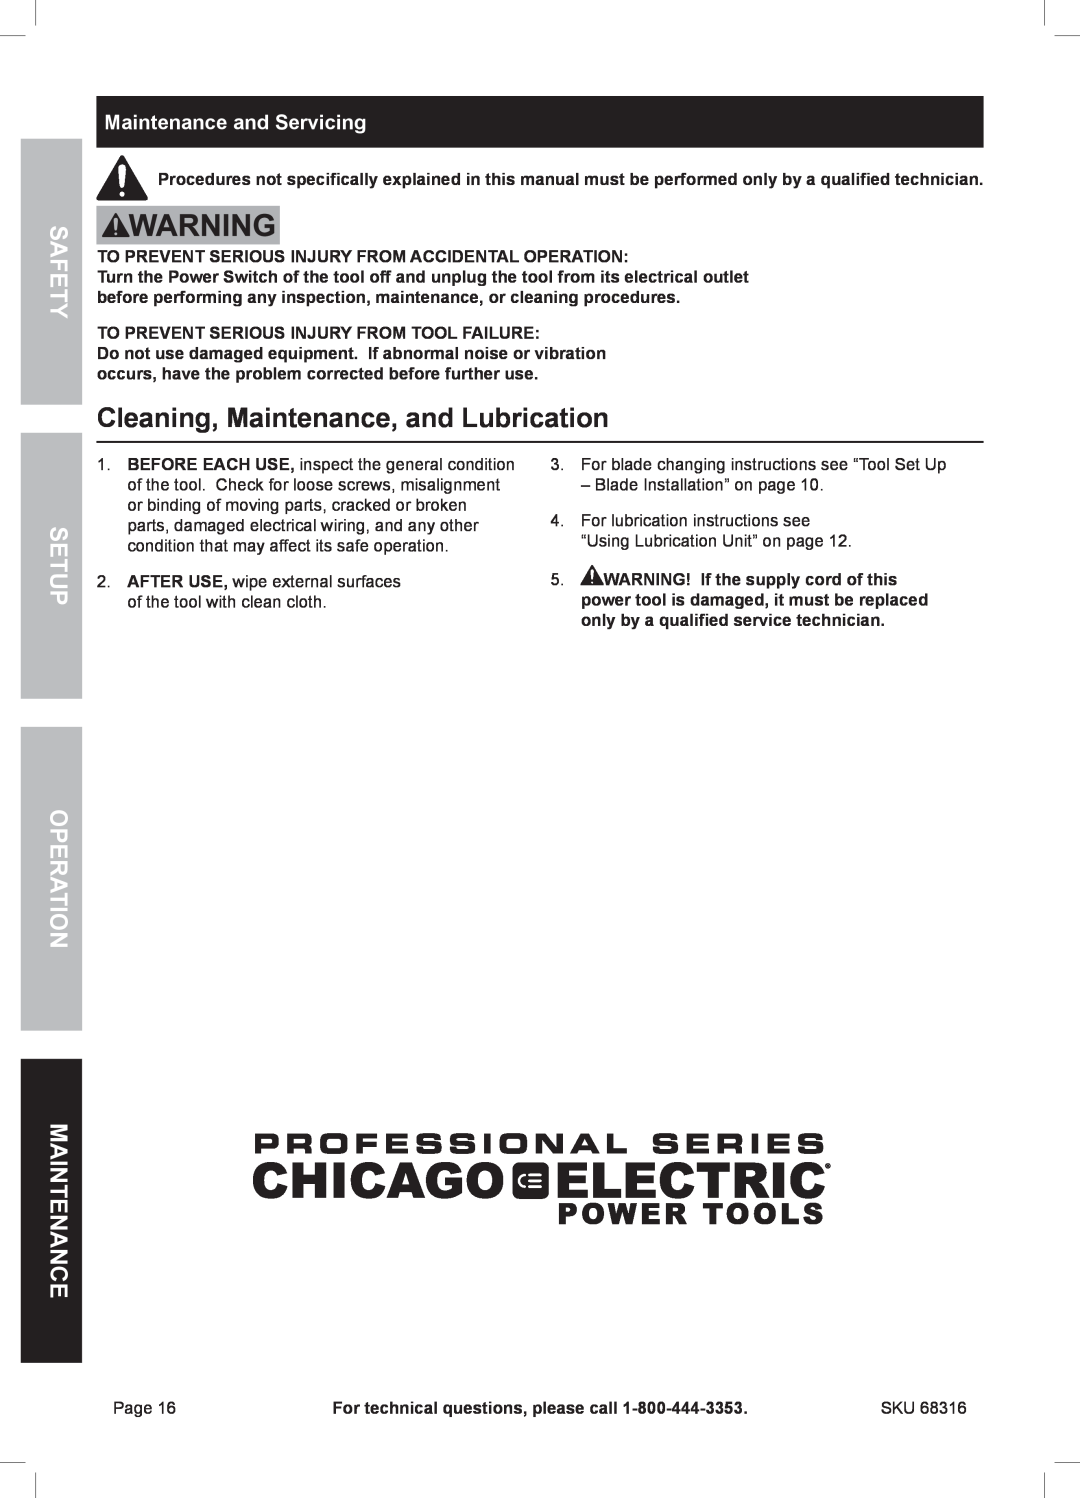 Chicago Electric 68316 owner manual Cleaning, Maintenance, and Lubrication, Maintenance and Servicing, Safety 